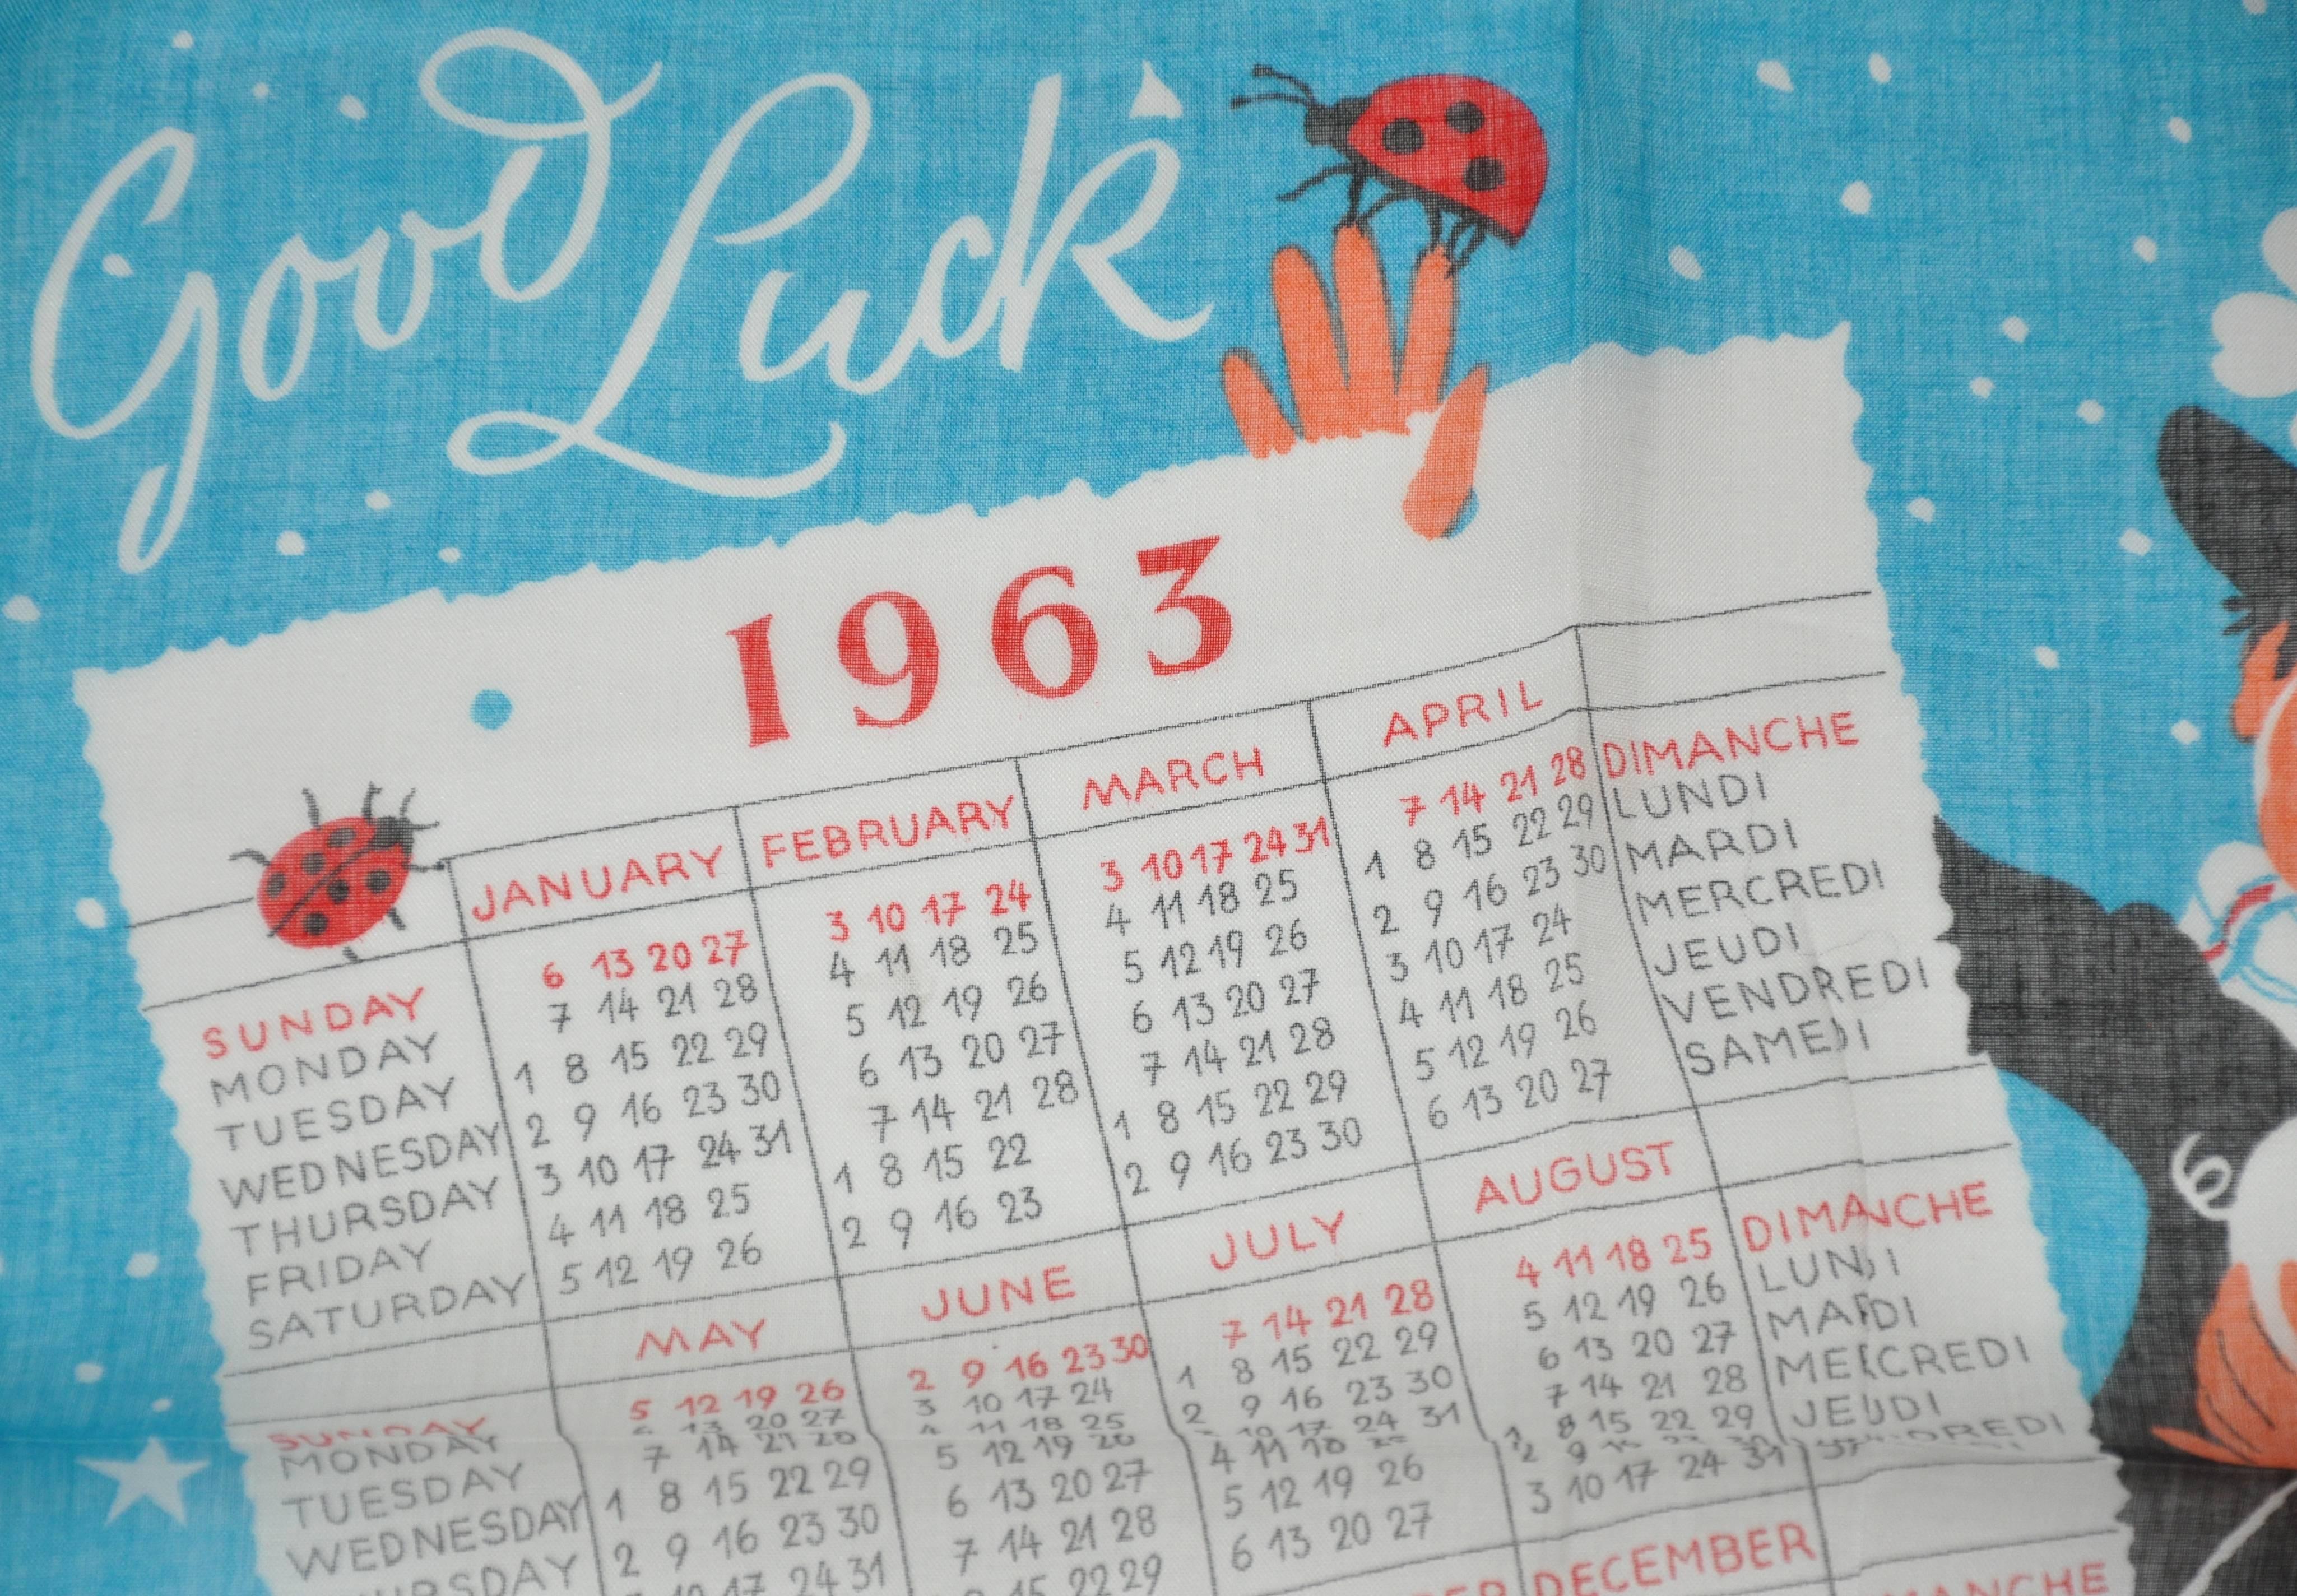 "1963" calendar cotton handkerchief measures 14" x 14" with white hand-rolled edges. Made in USA.